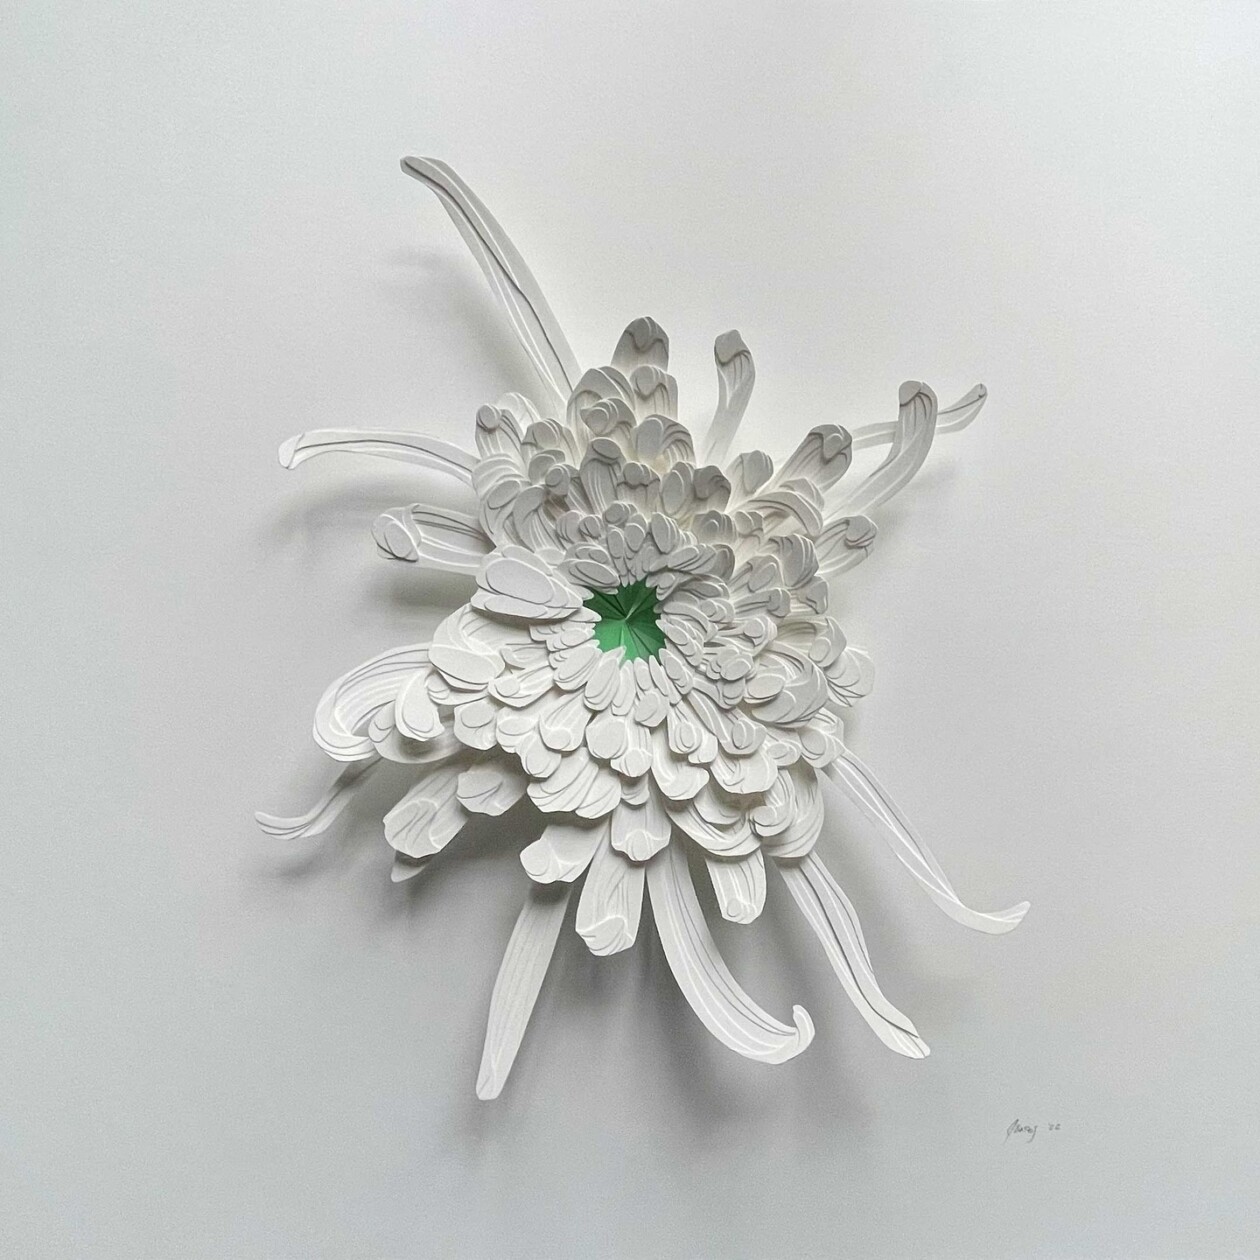 Gorgeously Intricate Floral Paper Cutting Sculptures By Joey Bates (2)